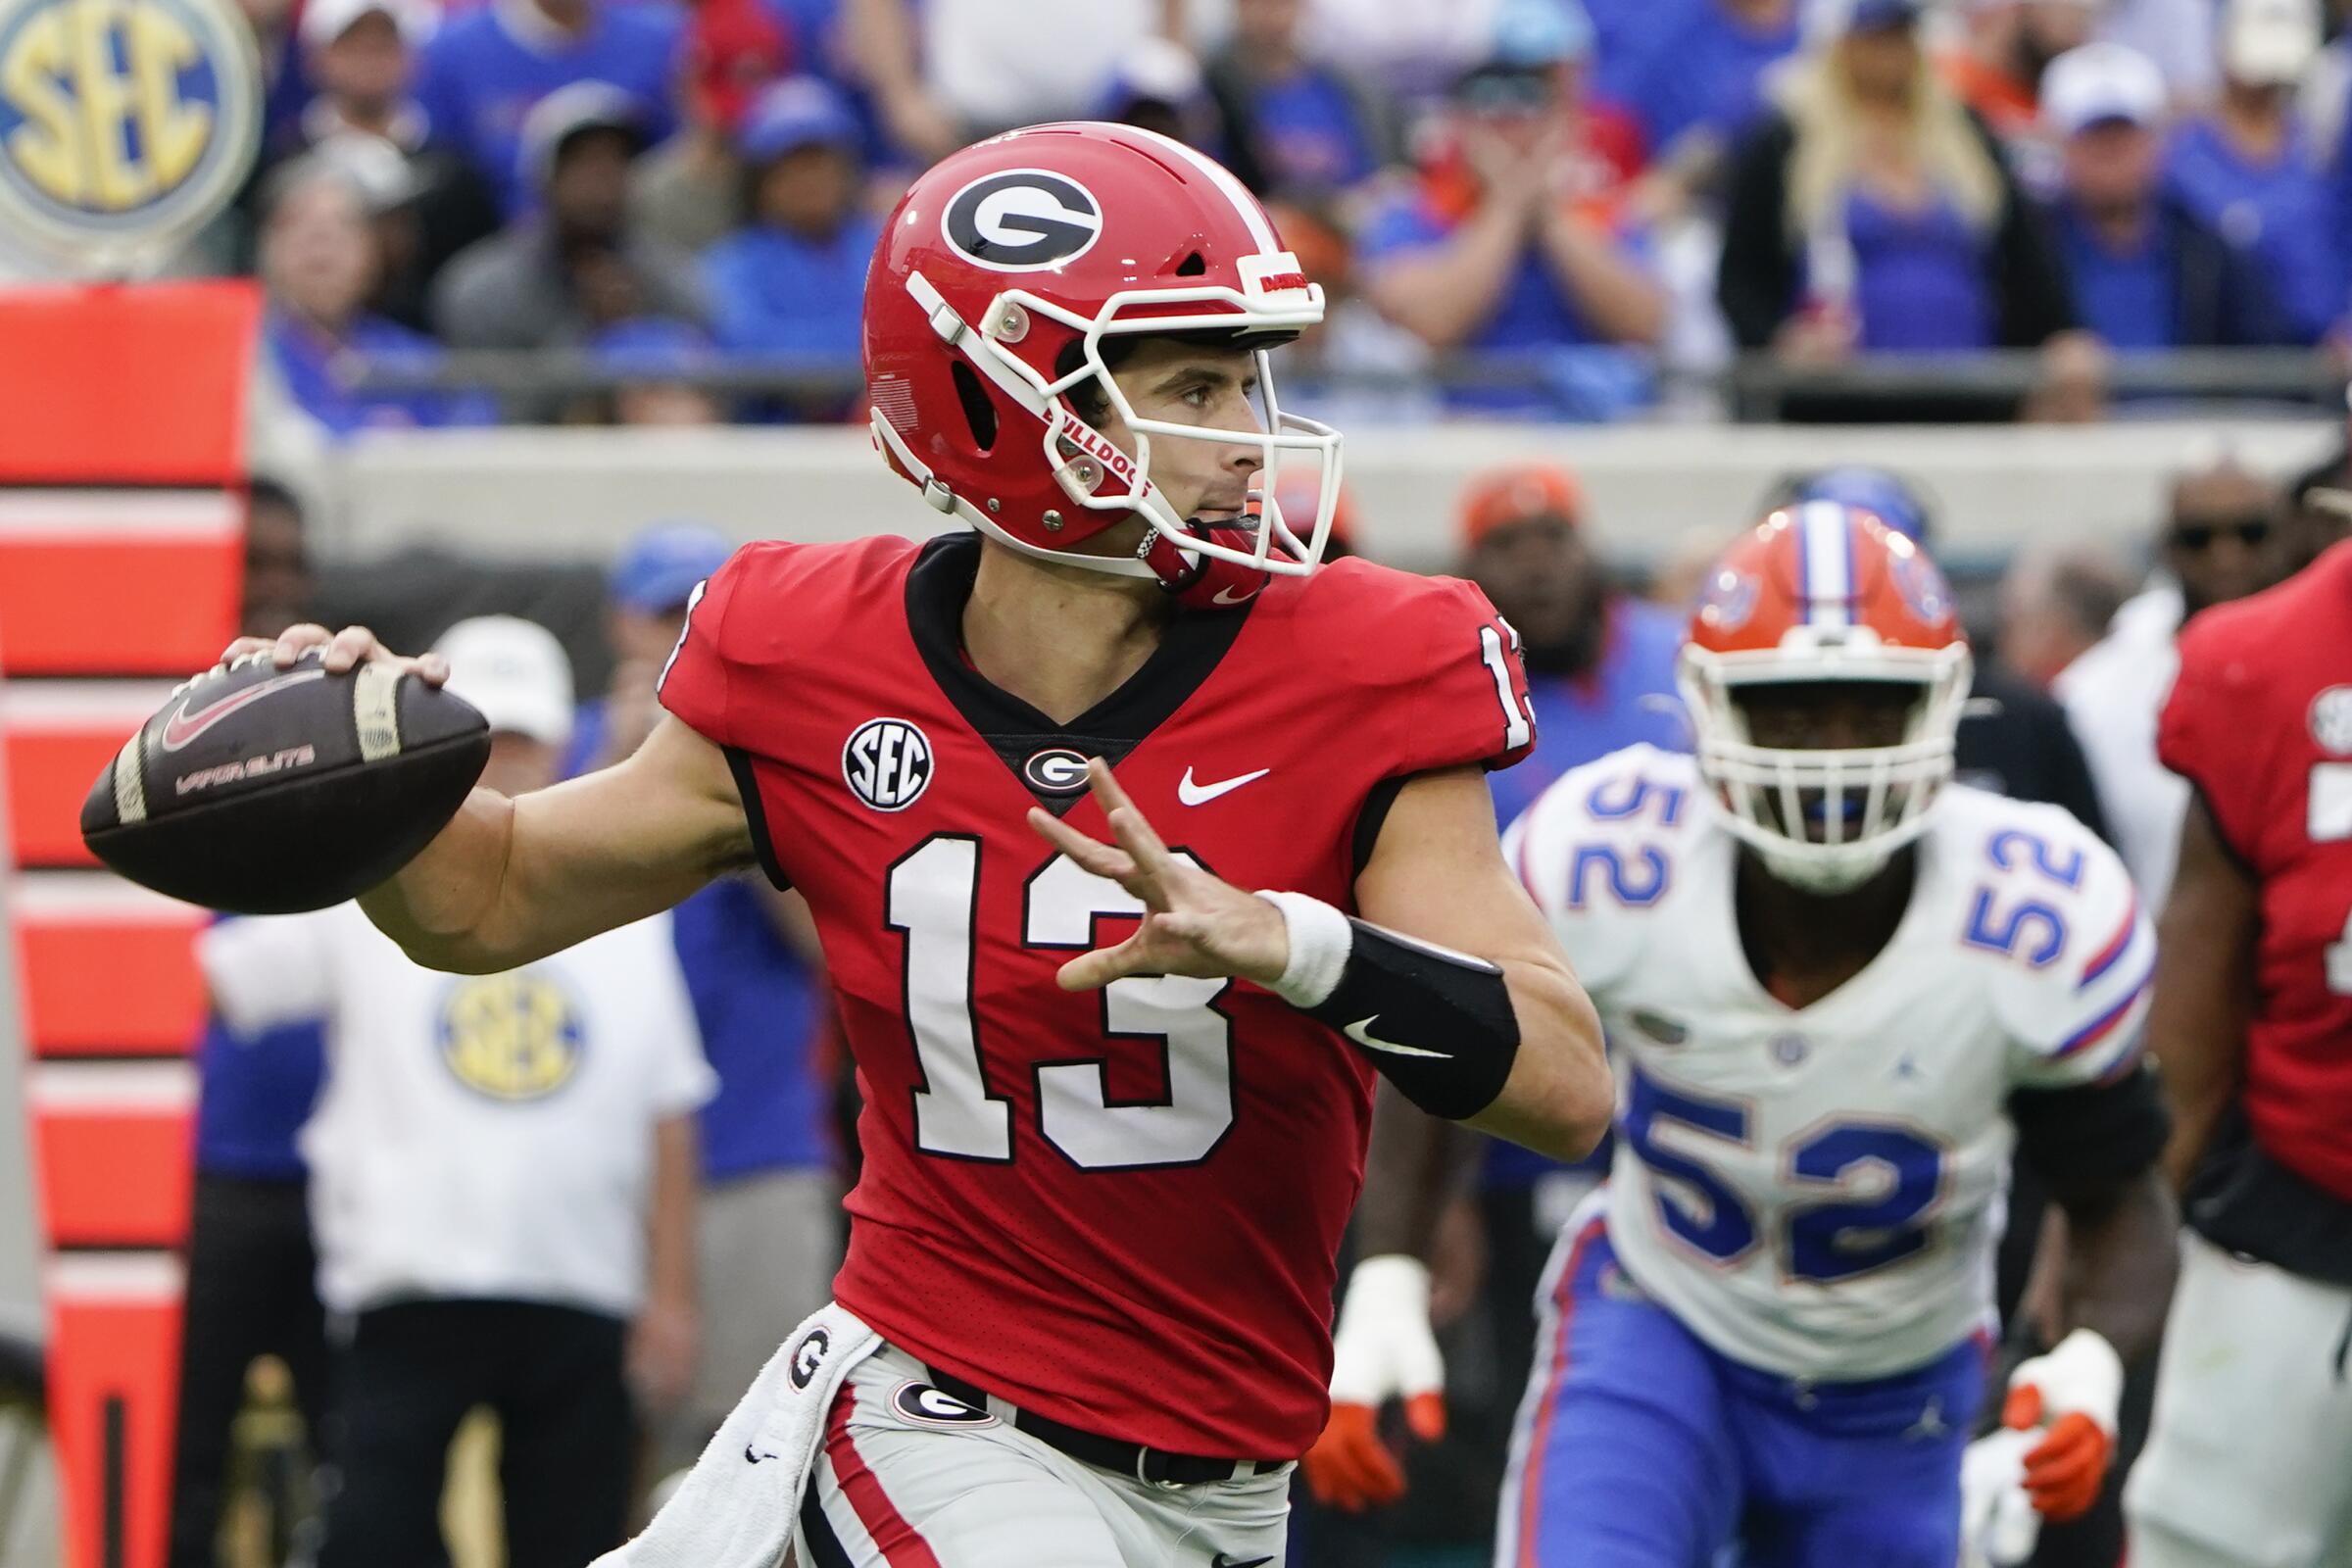 Georgia state championships primer: 11 players to know